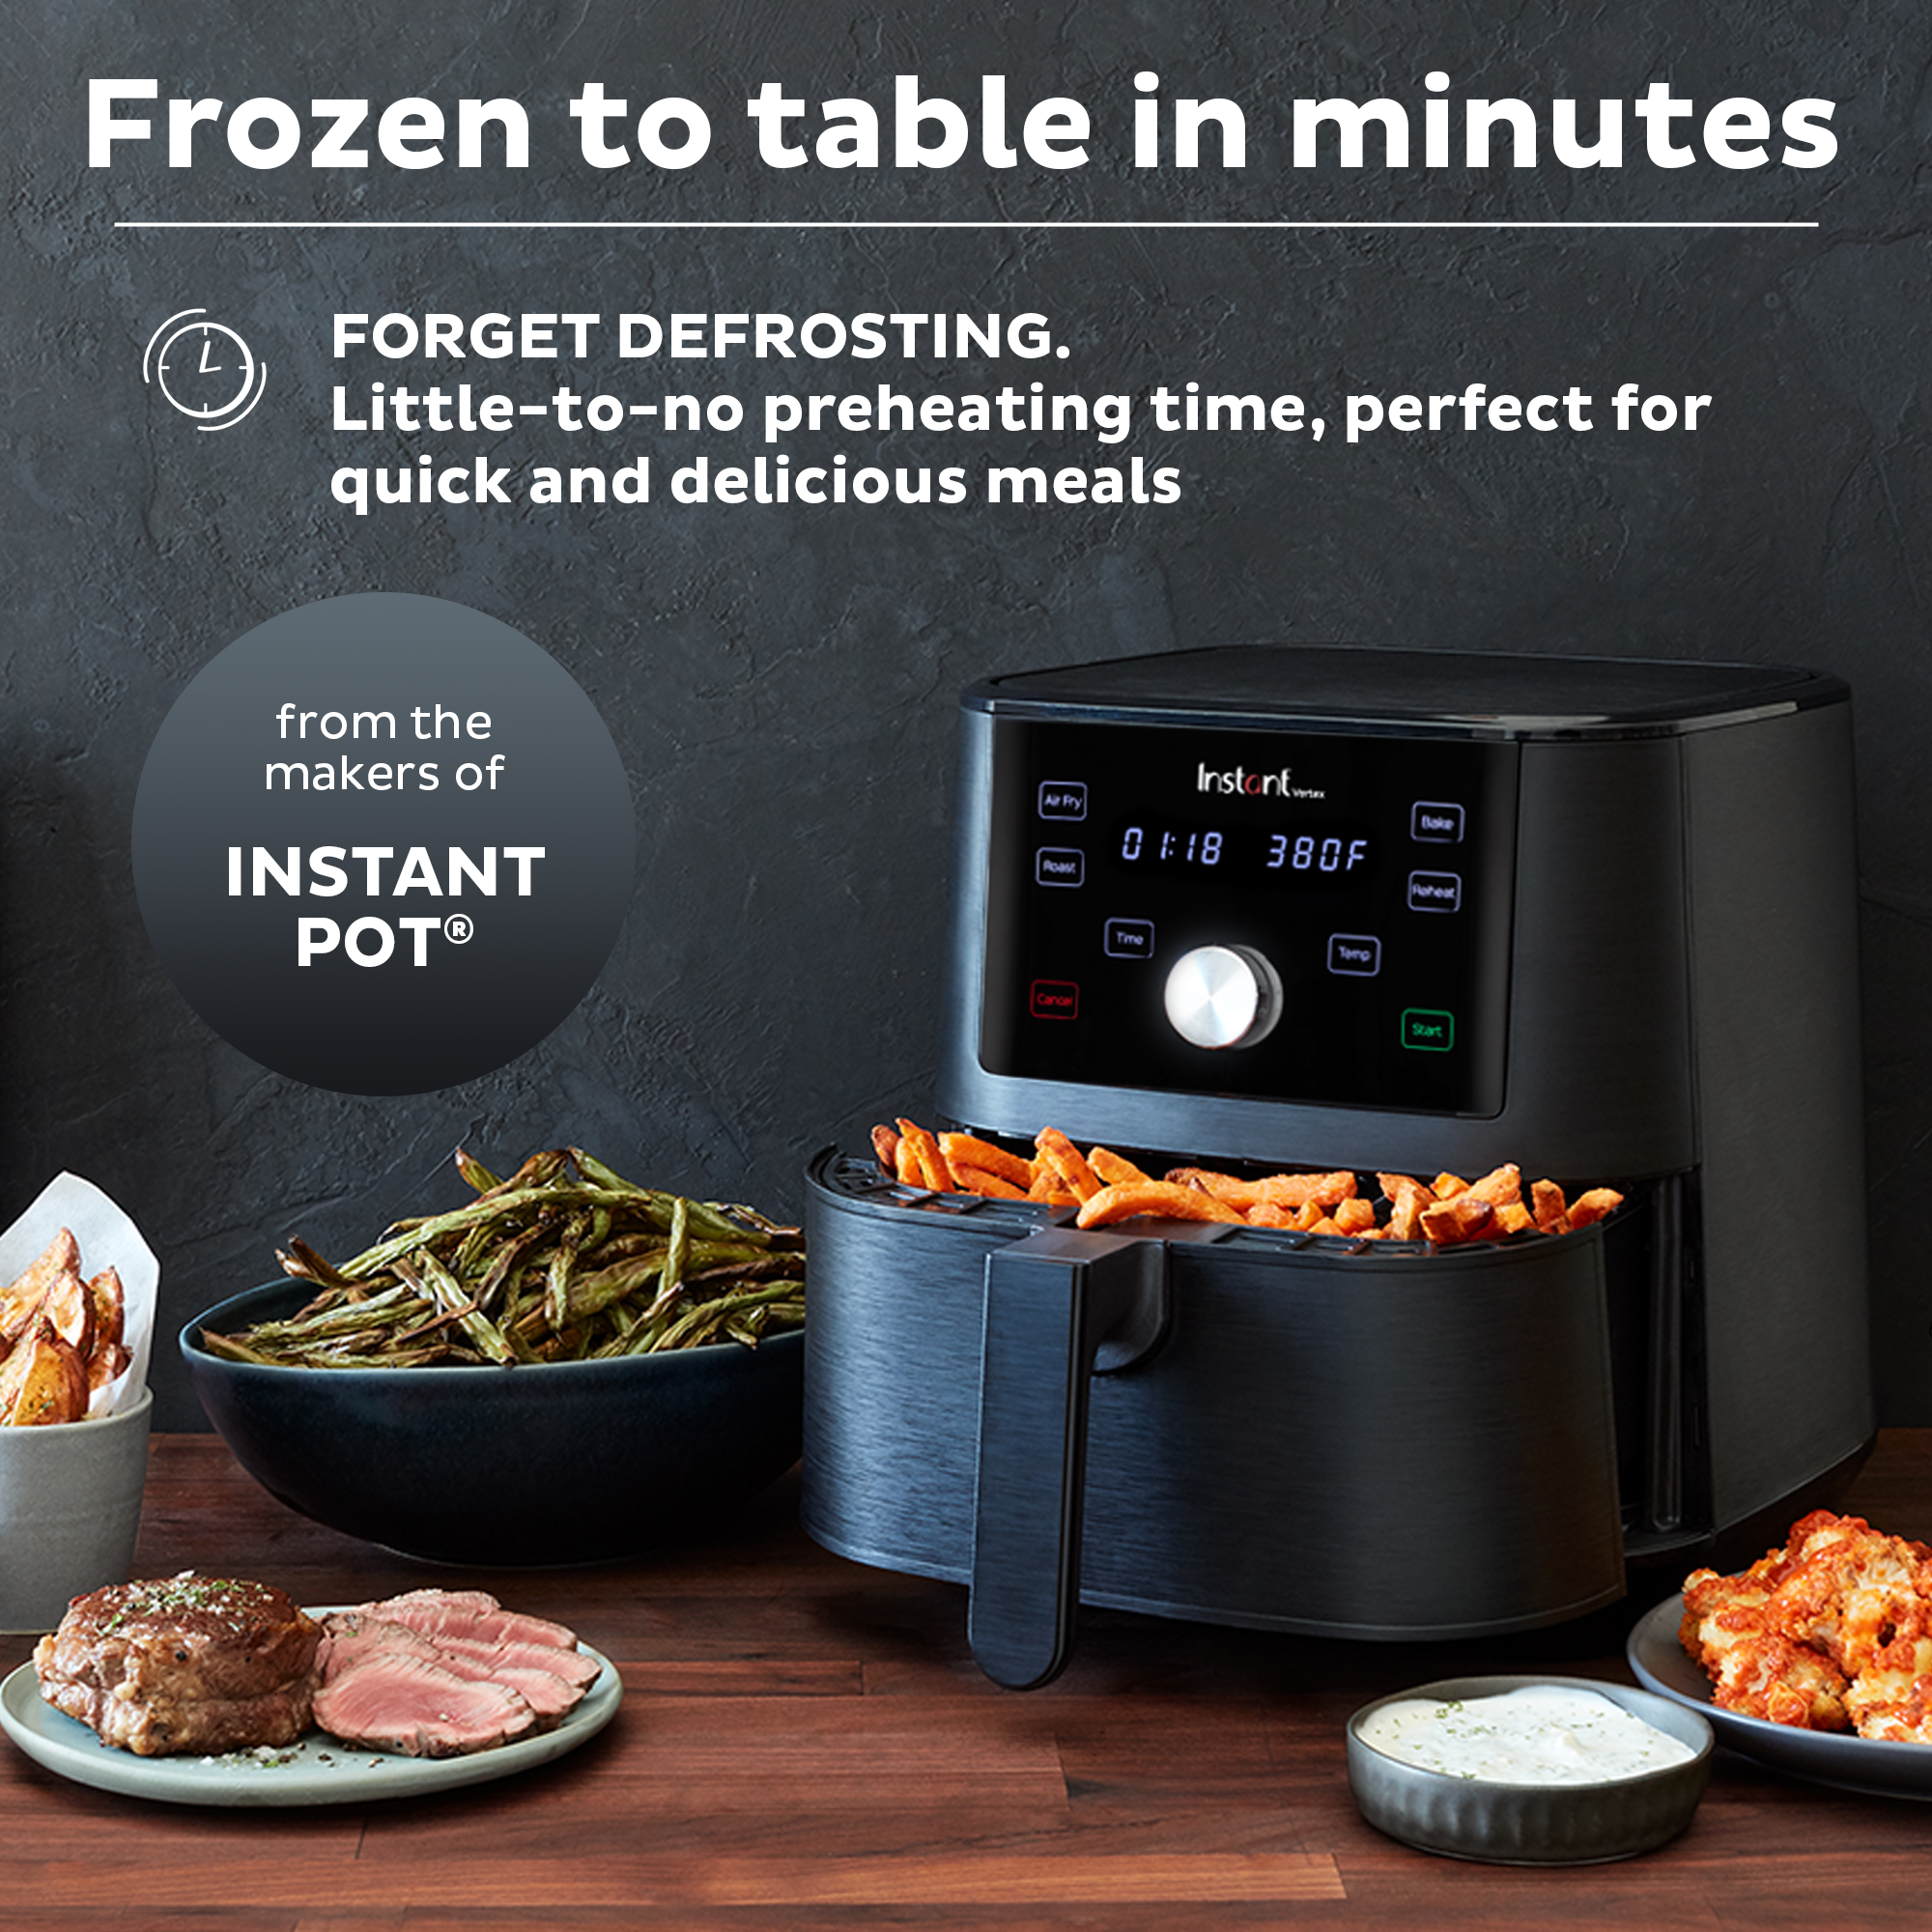 Instant Vortex 6-Quart Air Fryer Oven with Single Basket, 4-in-1 Function, Black - image 3 of 7